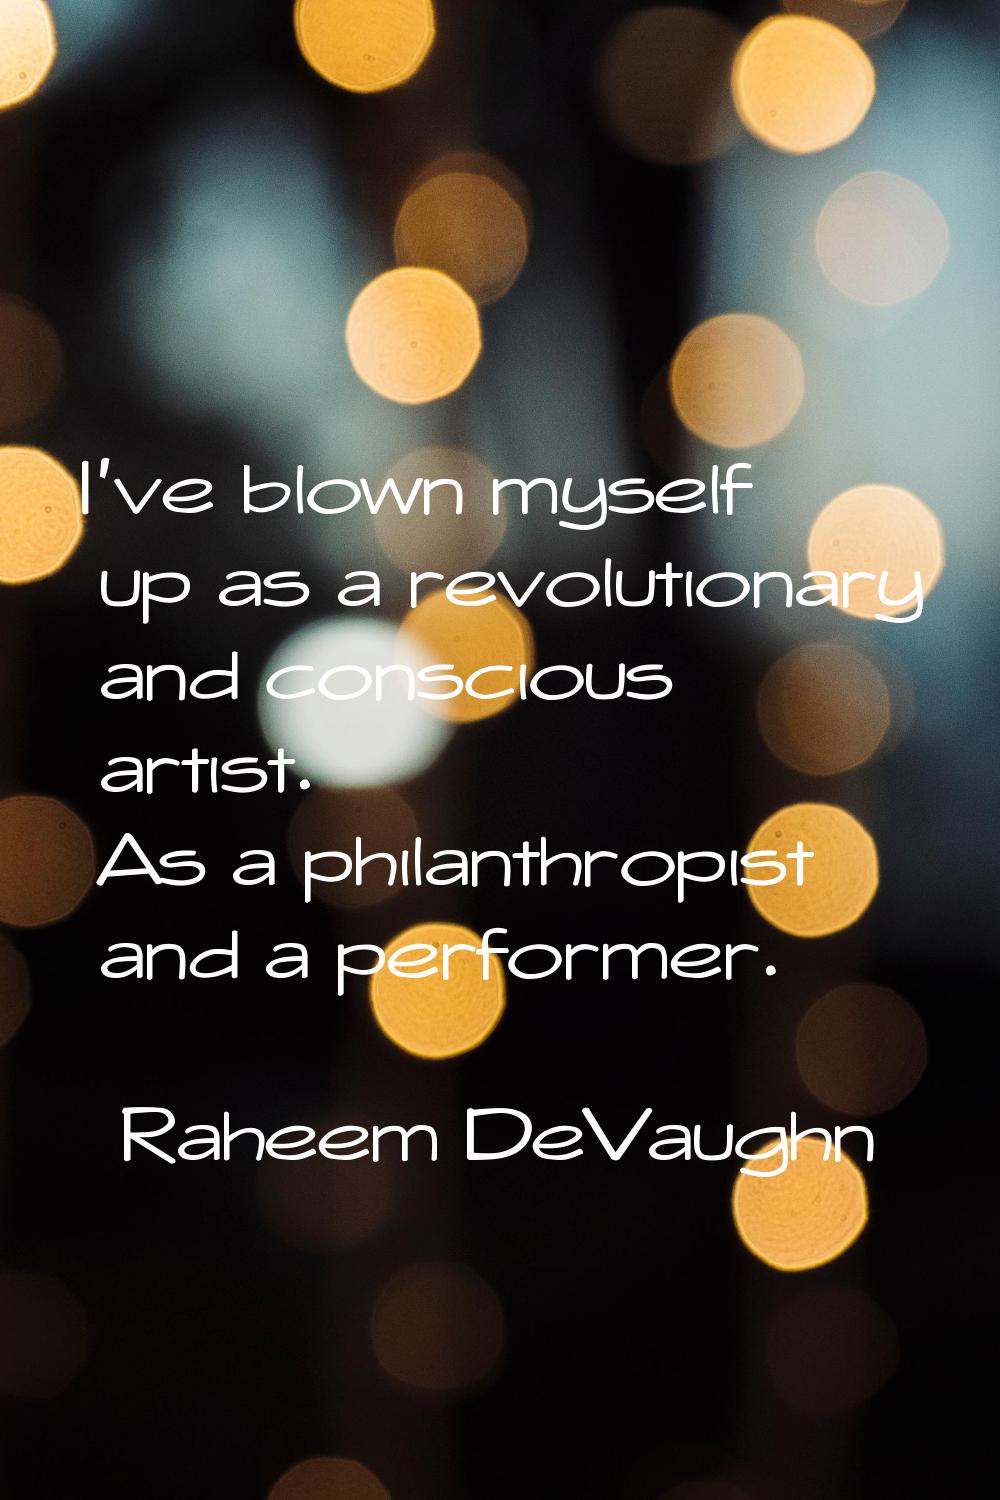 I've blown myself up as a revolutionary and conscious artist. As a philanthropist and a performer.